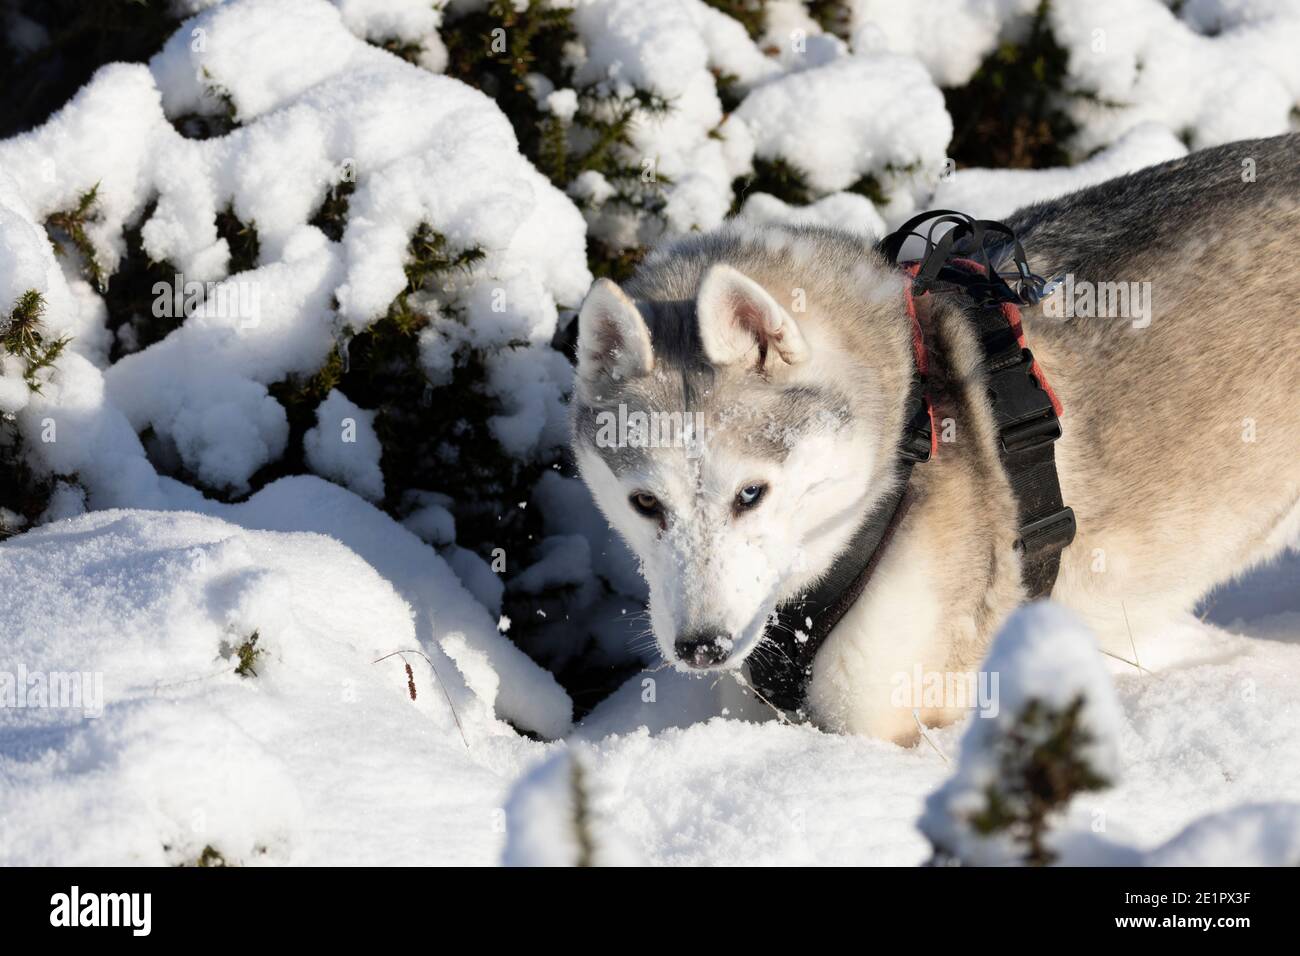 Flintshire, North Wales, UK Saturday 9th January 2021, UK Weather:  Freezing overnight temperatures and heavy snowfall during Covid lockdown in Flintshire, North Wales. Neena a siberian husky feeling very much at home in the deep snow near the village of Rhes-y-Cae, Flintshire © DGDImages/Alamy Live News Stock Photo